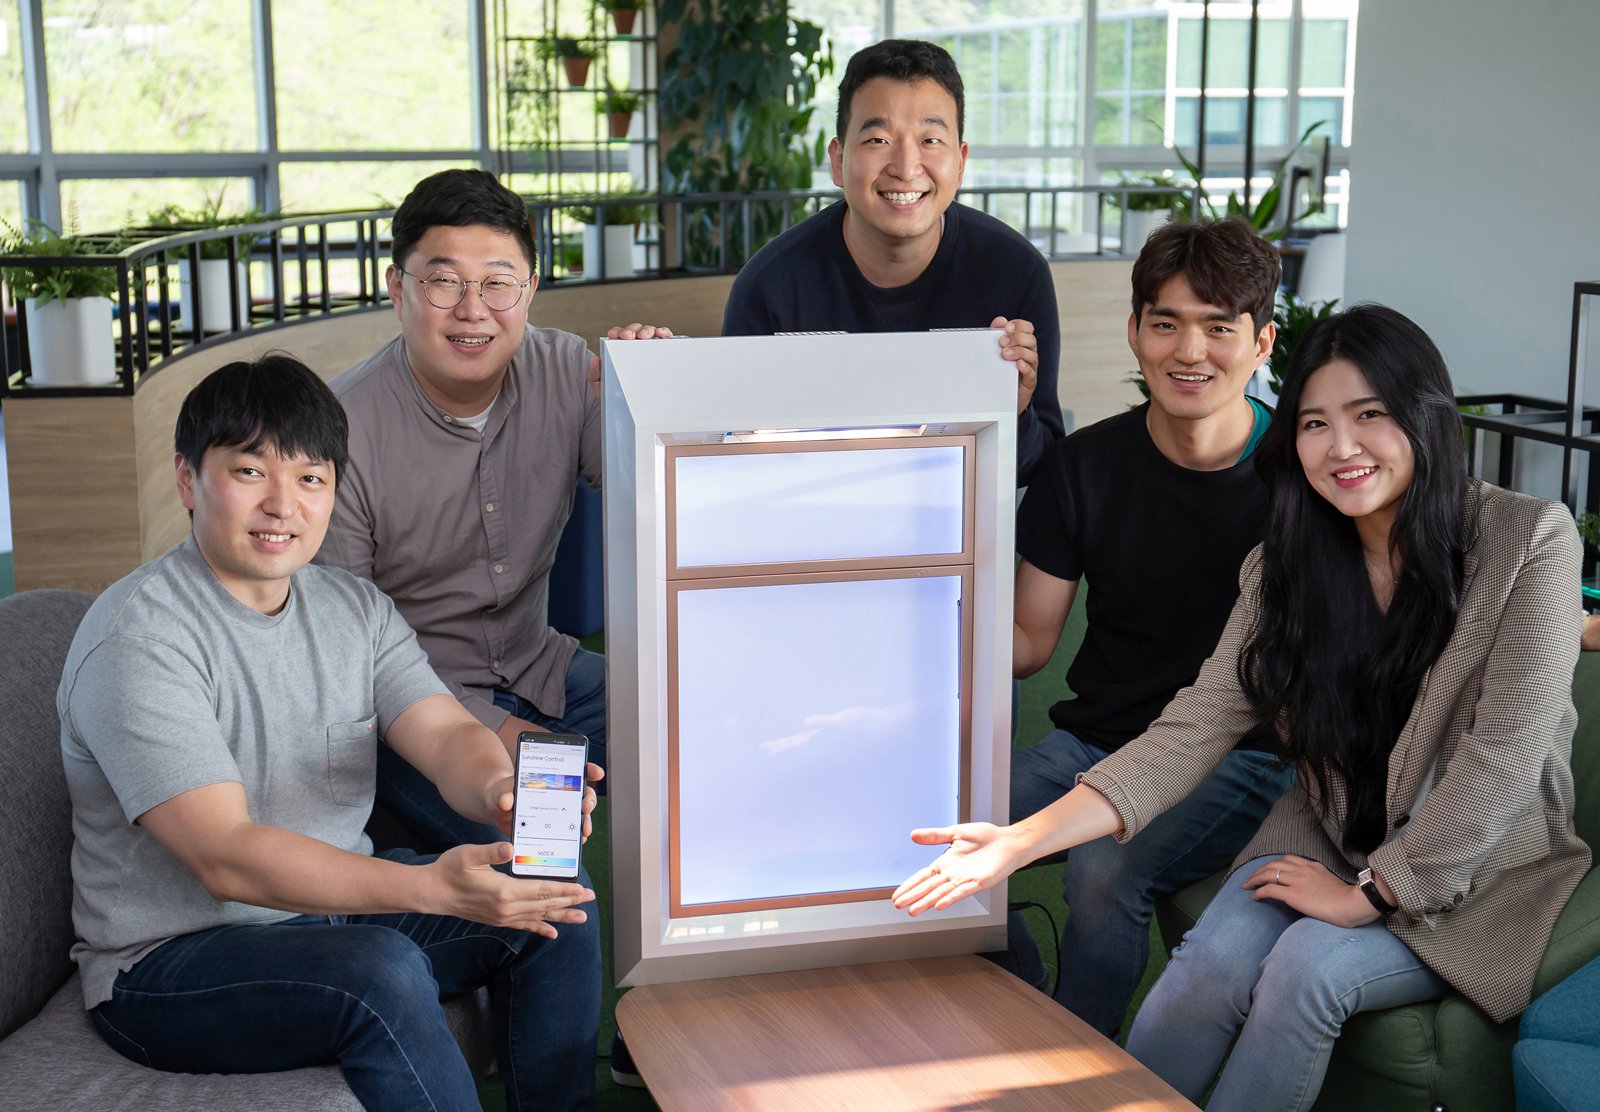 SunnyFive Artificial Sunlight Device Team Samsung C-Lab Spin-Off Startup